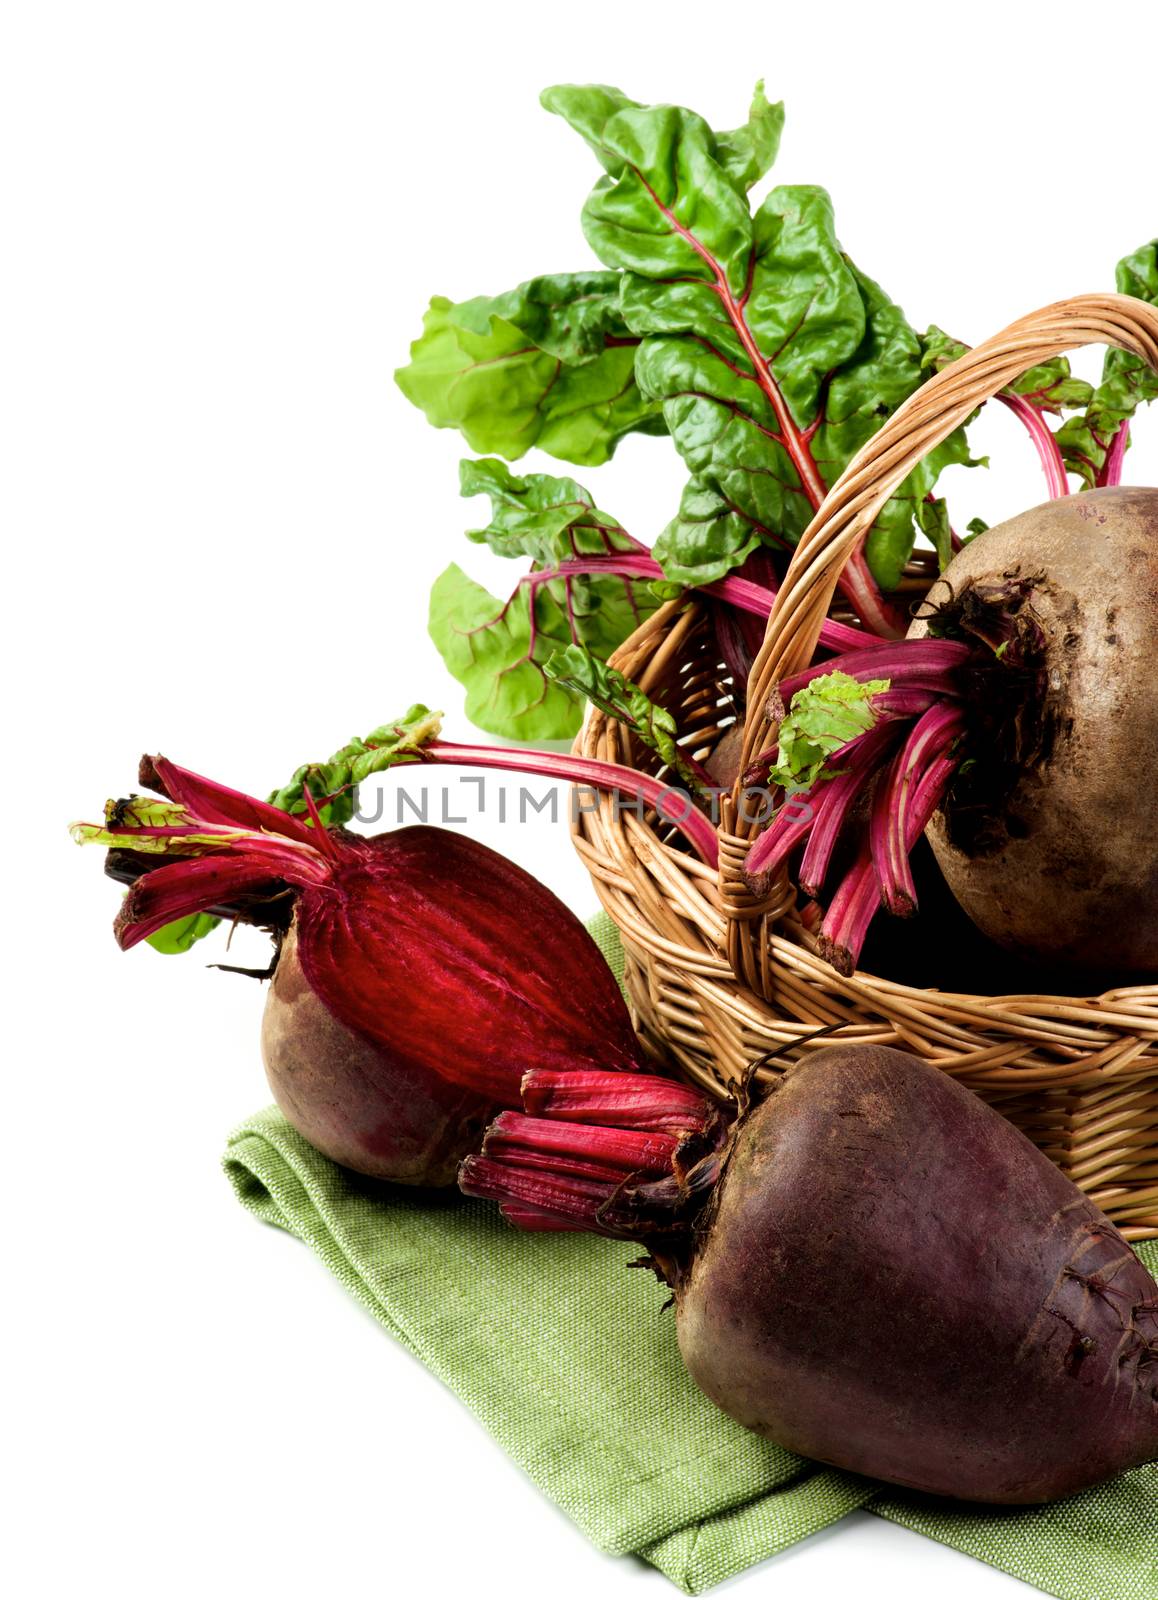 Arrangement Fresh Raw Organic Beet Roots with Green Beet Tops in Wicker Basket on Napkin isolated on White background